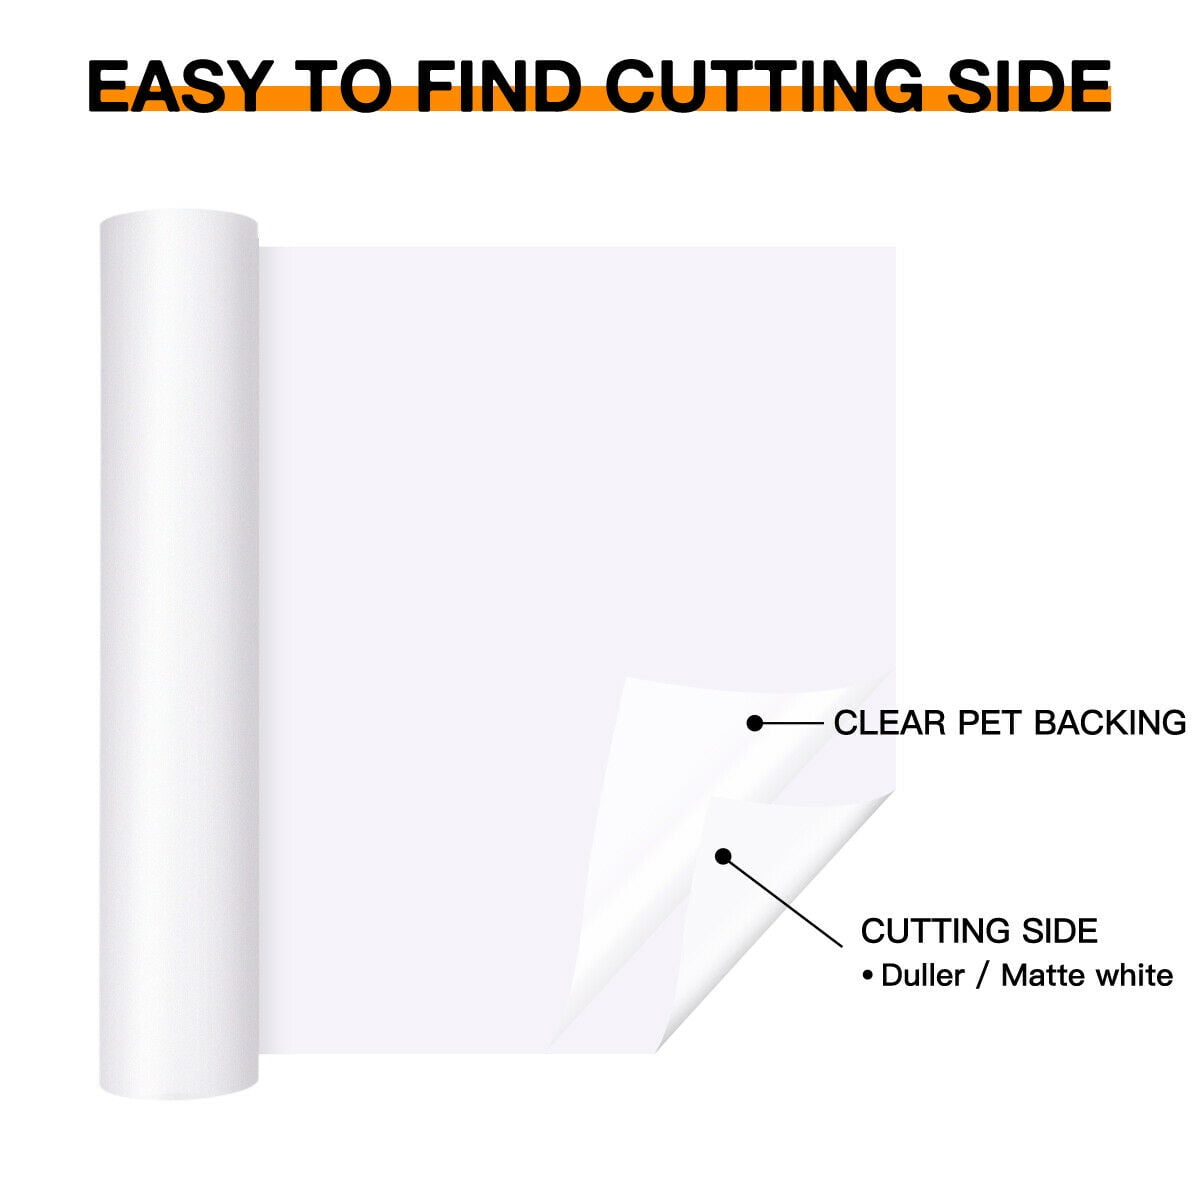  HTVRONT White Permanent Vinyl, White Vinyl for Cricut - 12 x  14 FT White Adhesive Vinyl Roll for Cricut, Silhouette, Cameo Cutters,  Signs, Scrapbooking, Craft, Die Cutters (Glossy White) : Arts